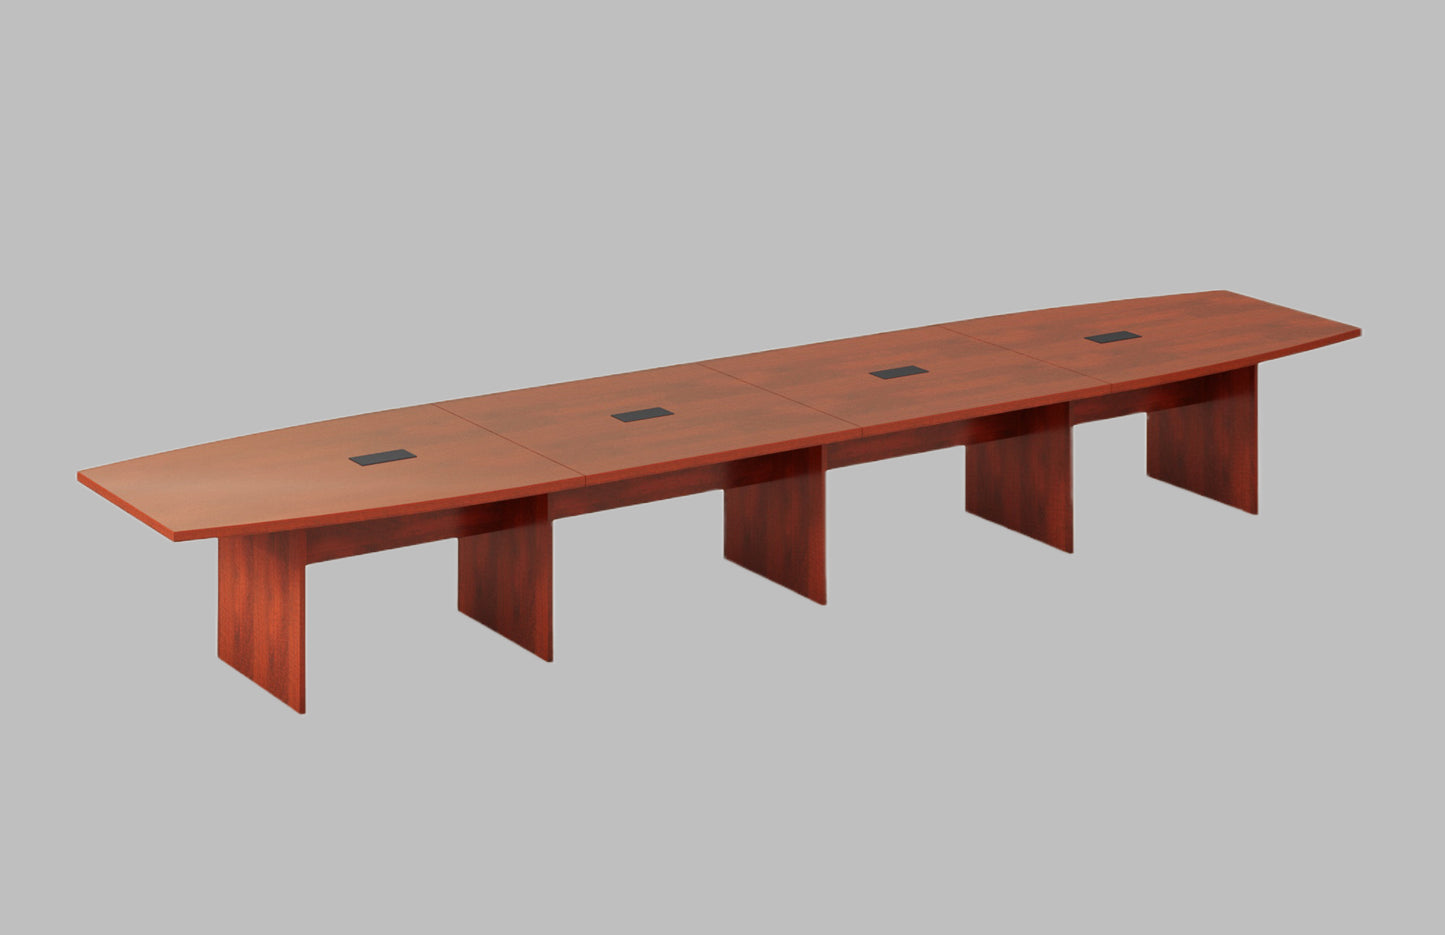 18FT Cherry Conference Table boat shaped conference table